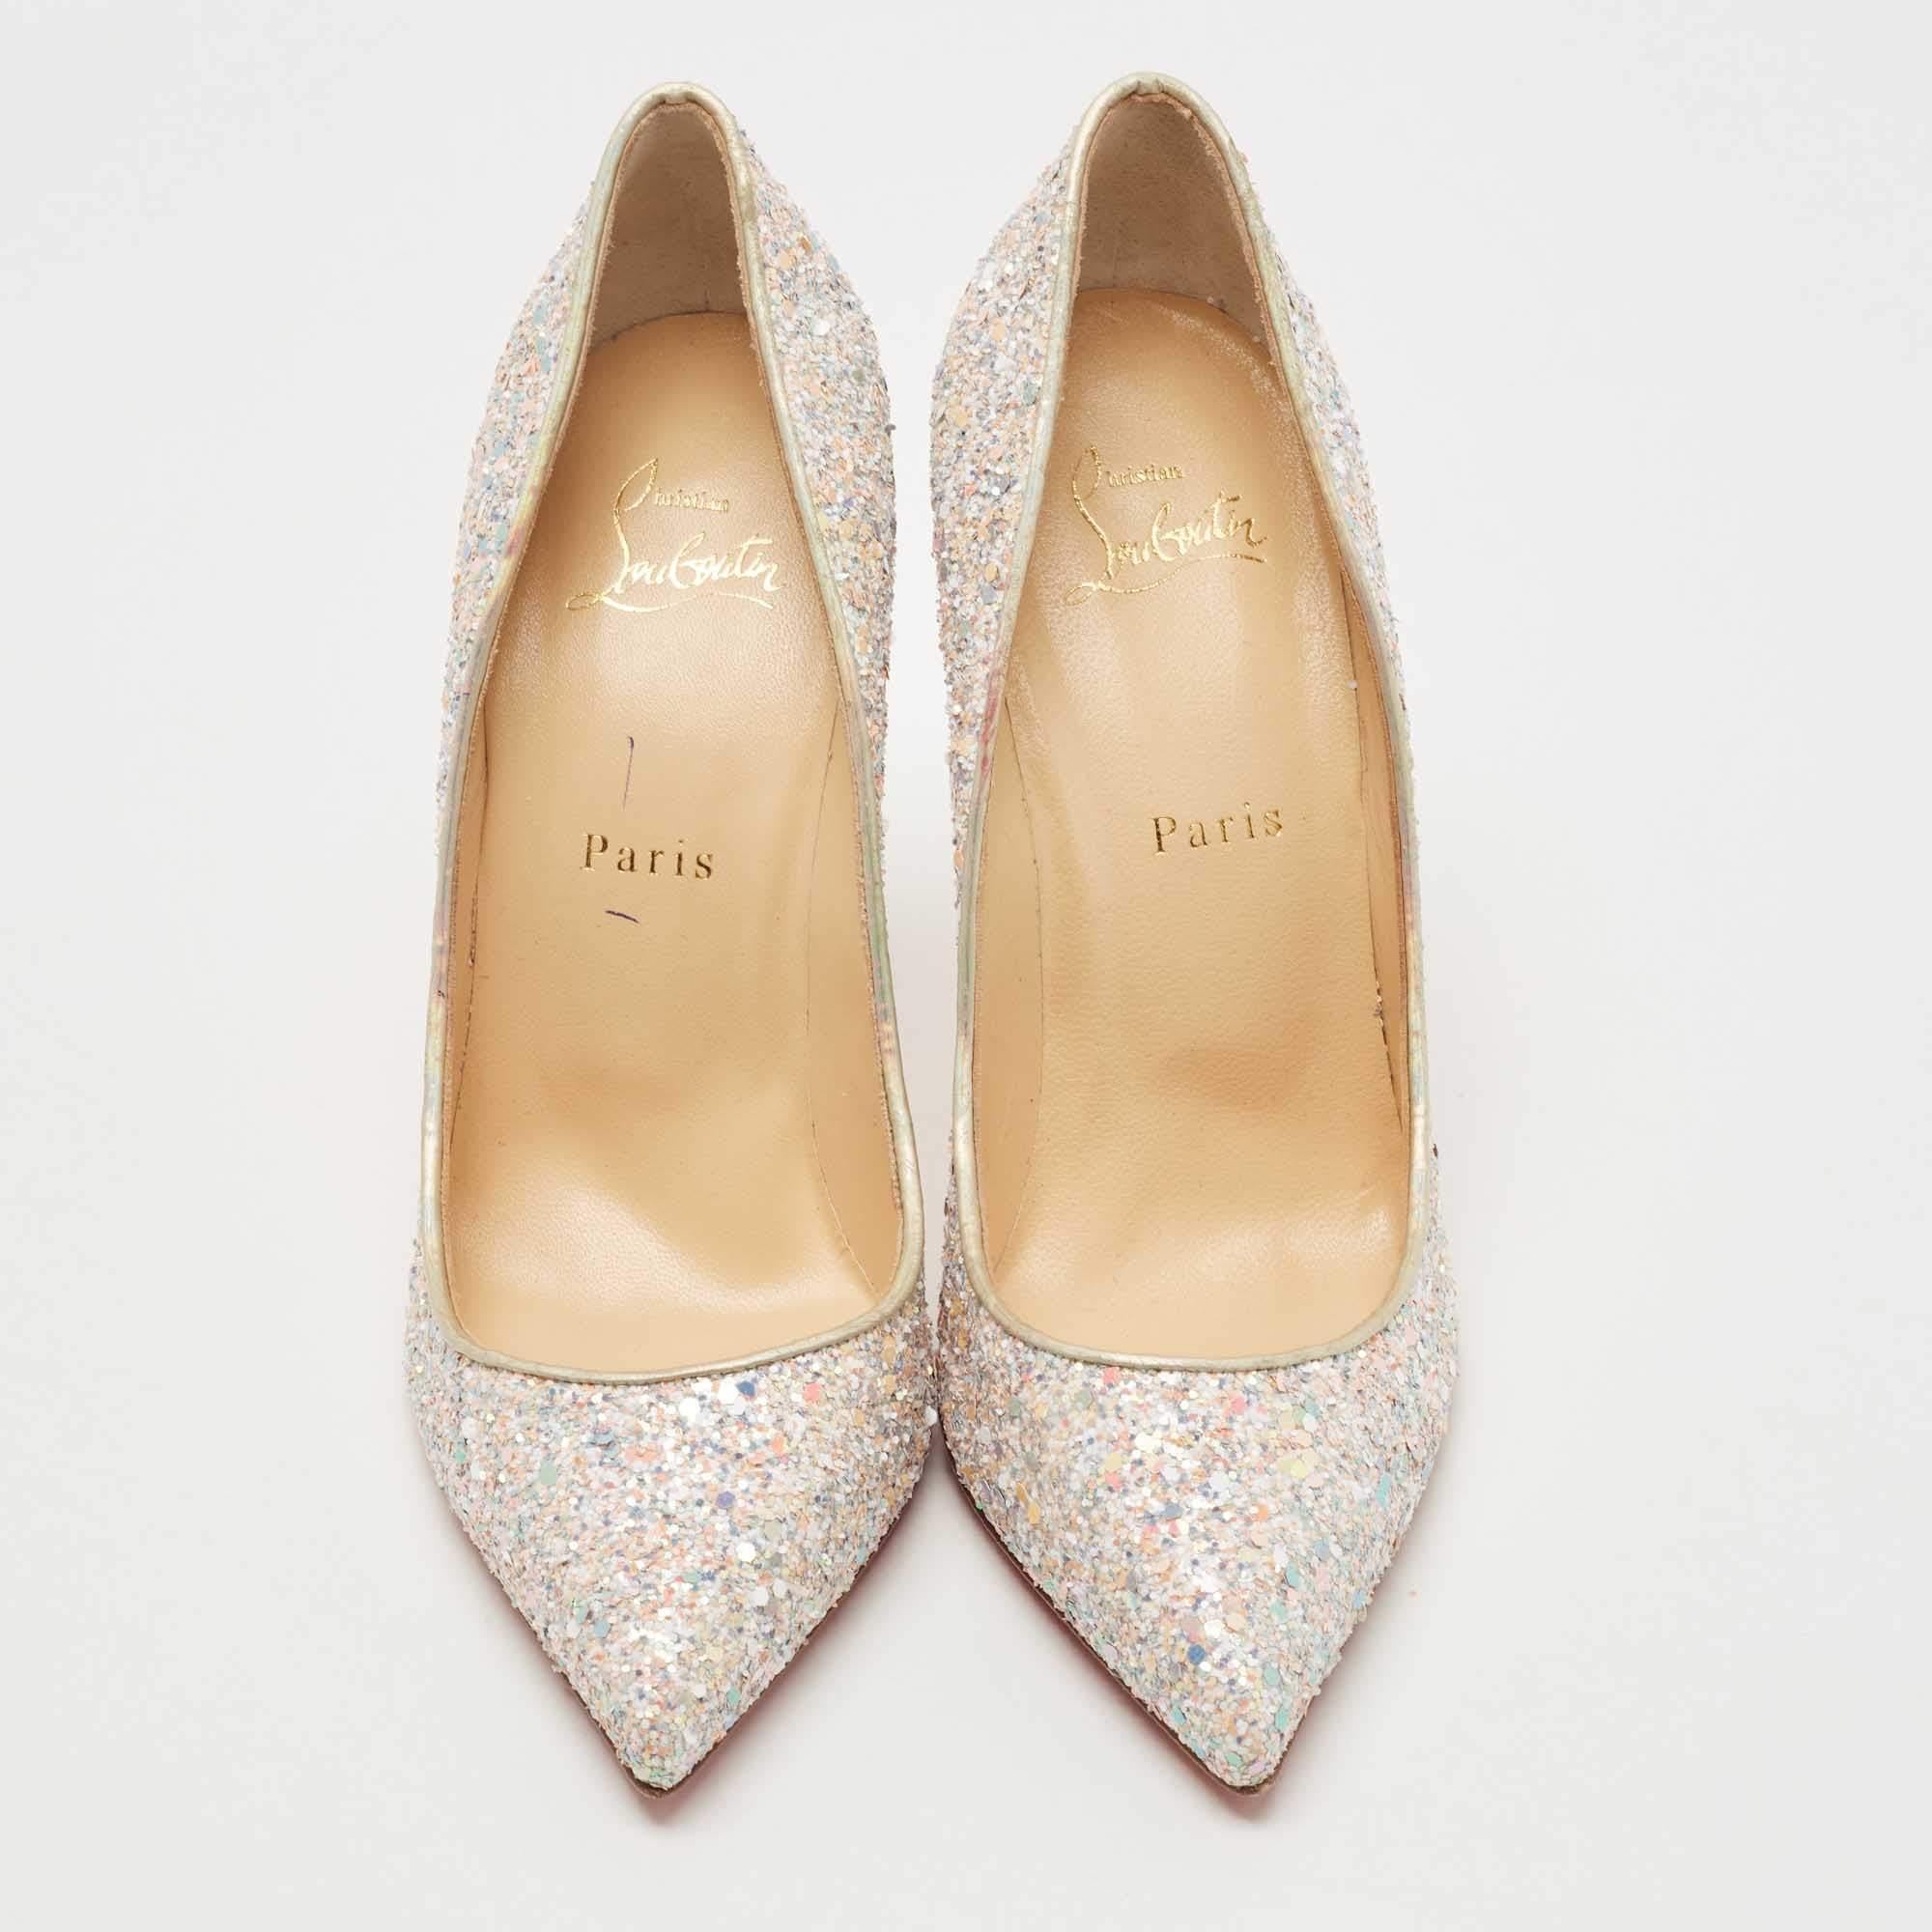 Dazzle everyone with these Louboutins by owning them today. Crafted from sparkling glitter, these Pigalle pumps carry a mesmerizing shape with pointed toes and 11 cm heels. Complete with the signature red soles, this pair truly embodies the fine art